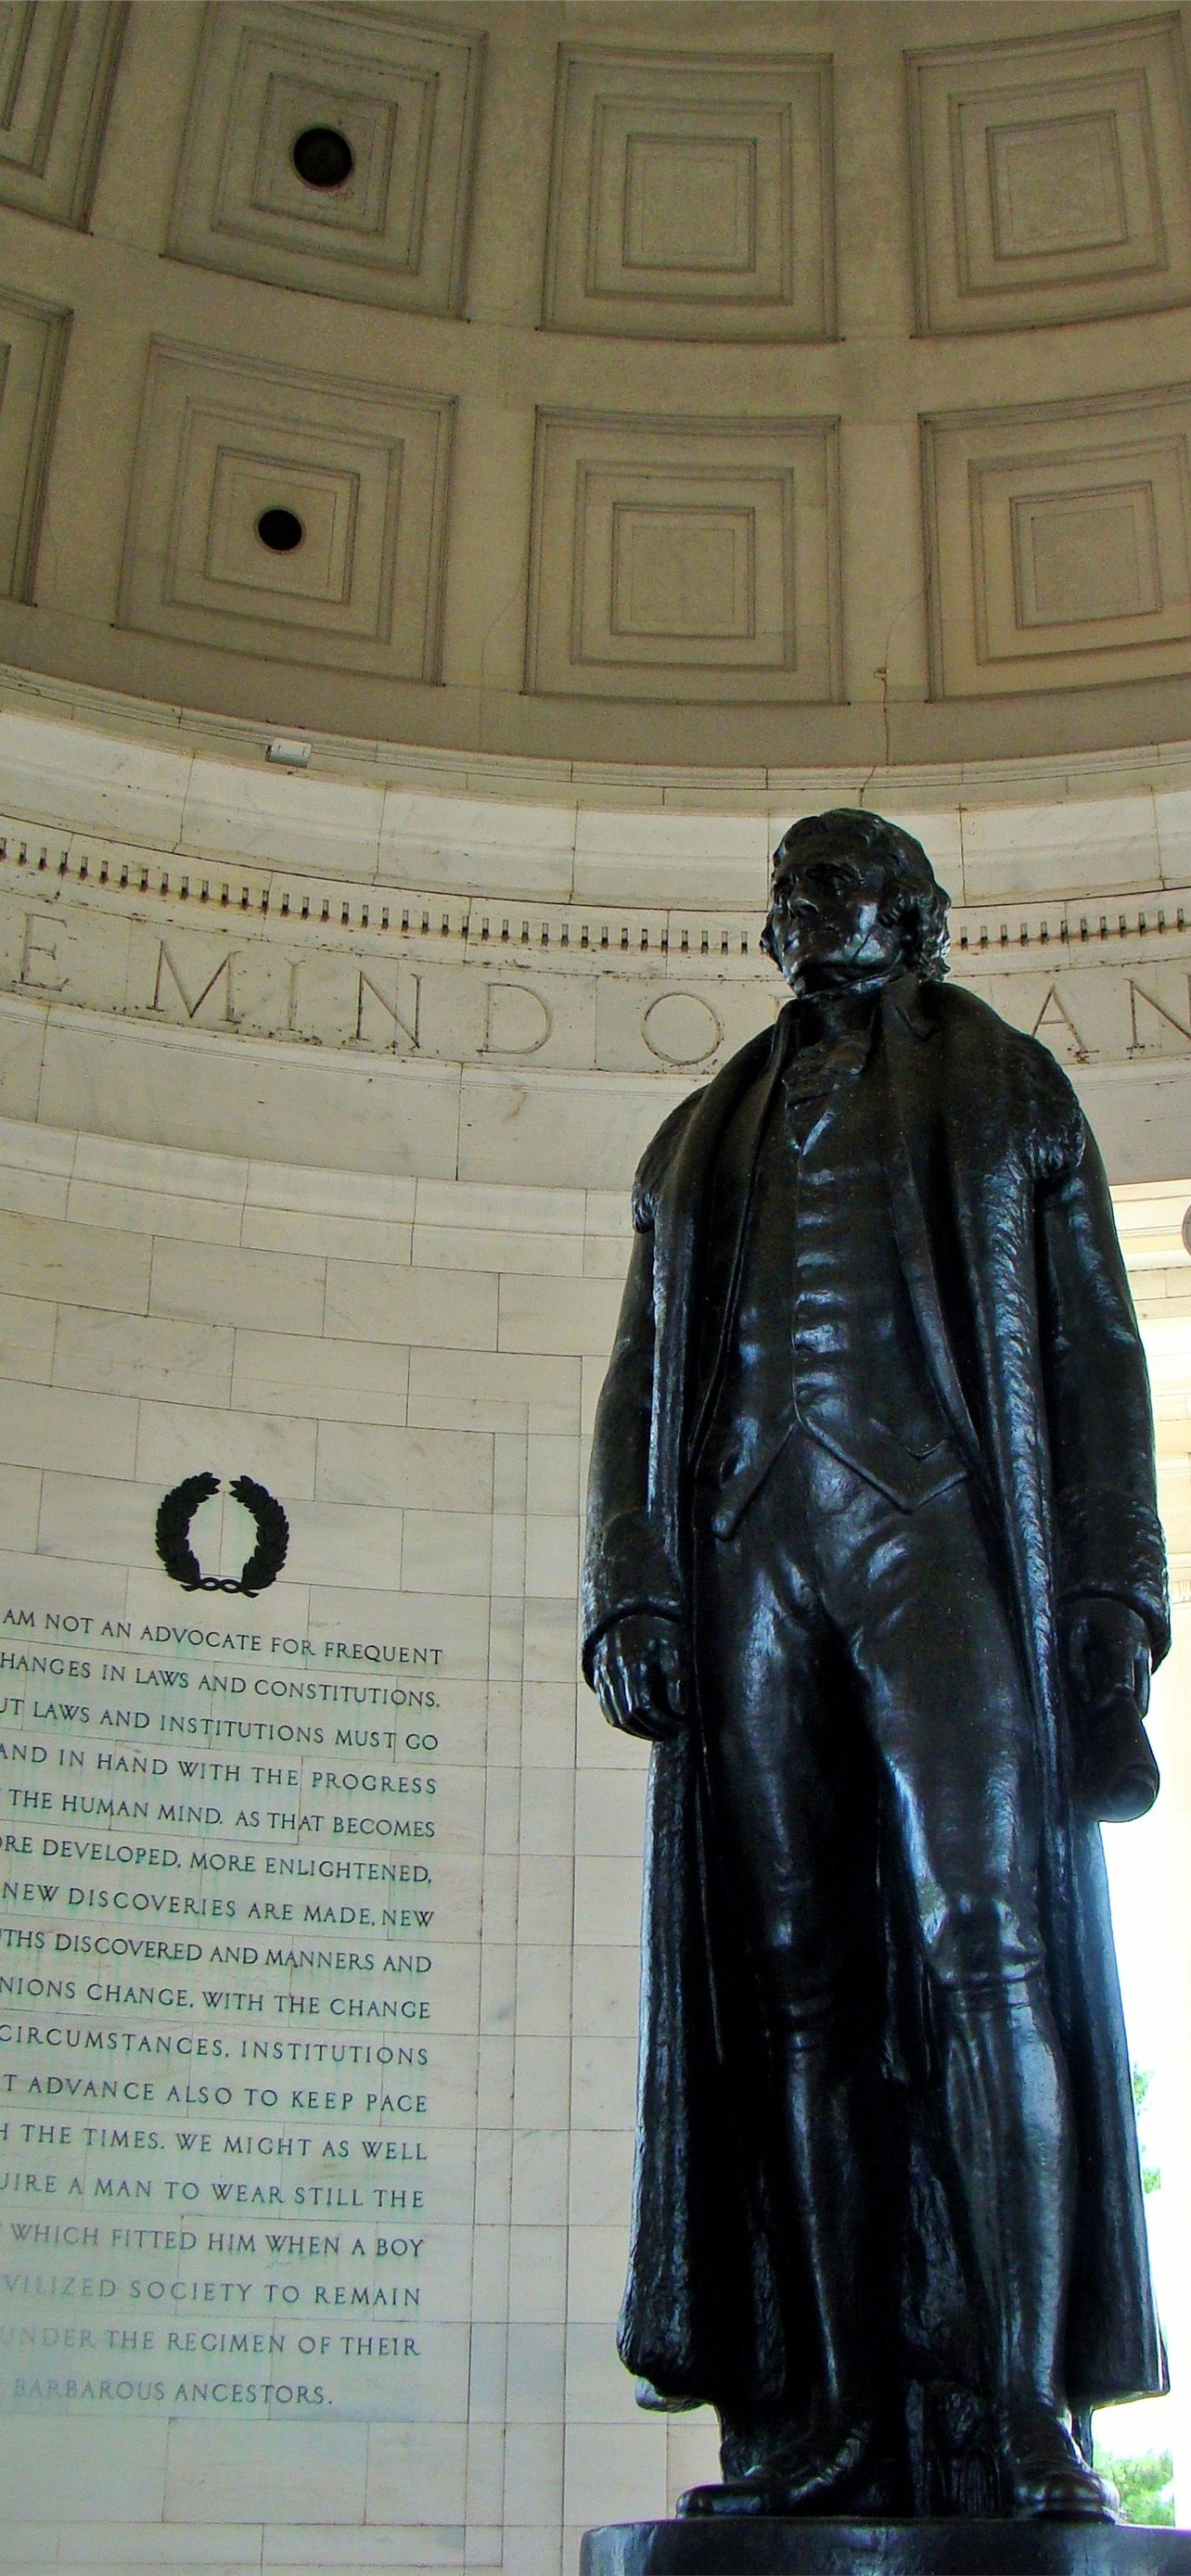 1284x2778 thomas jefferson memorial iPhone Wallpapers Free Download